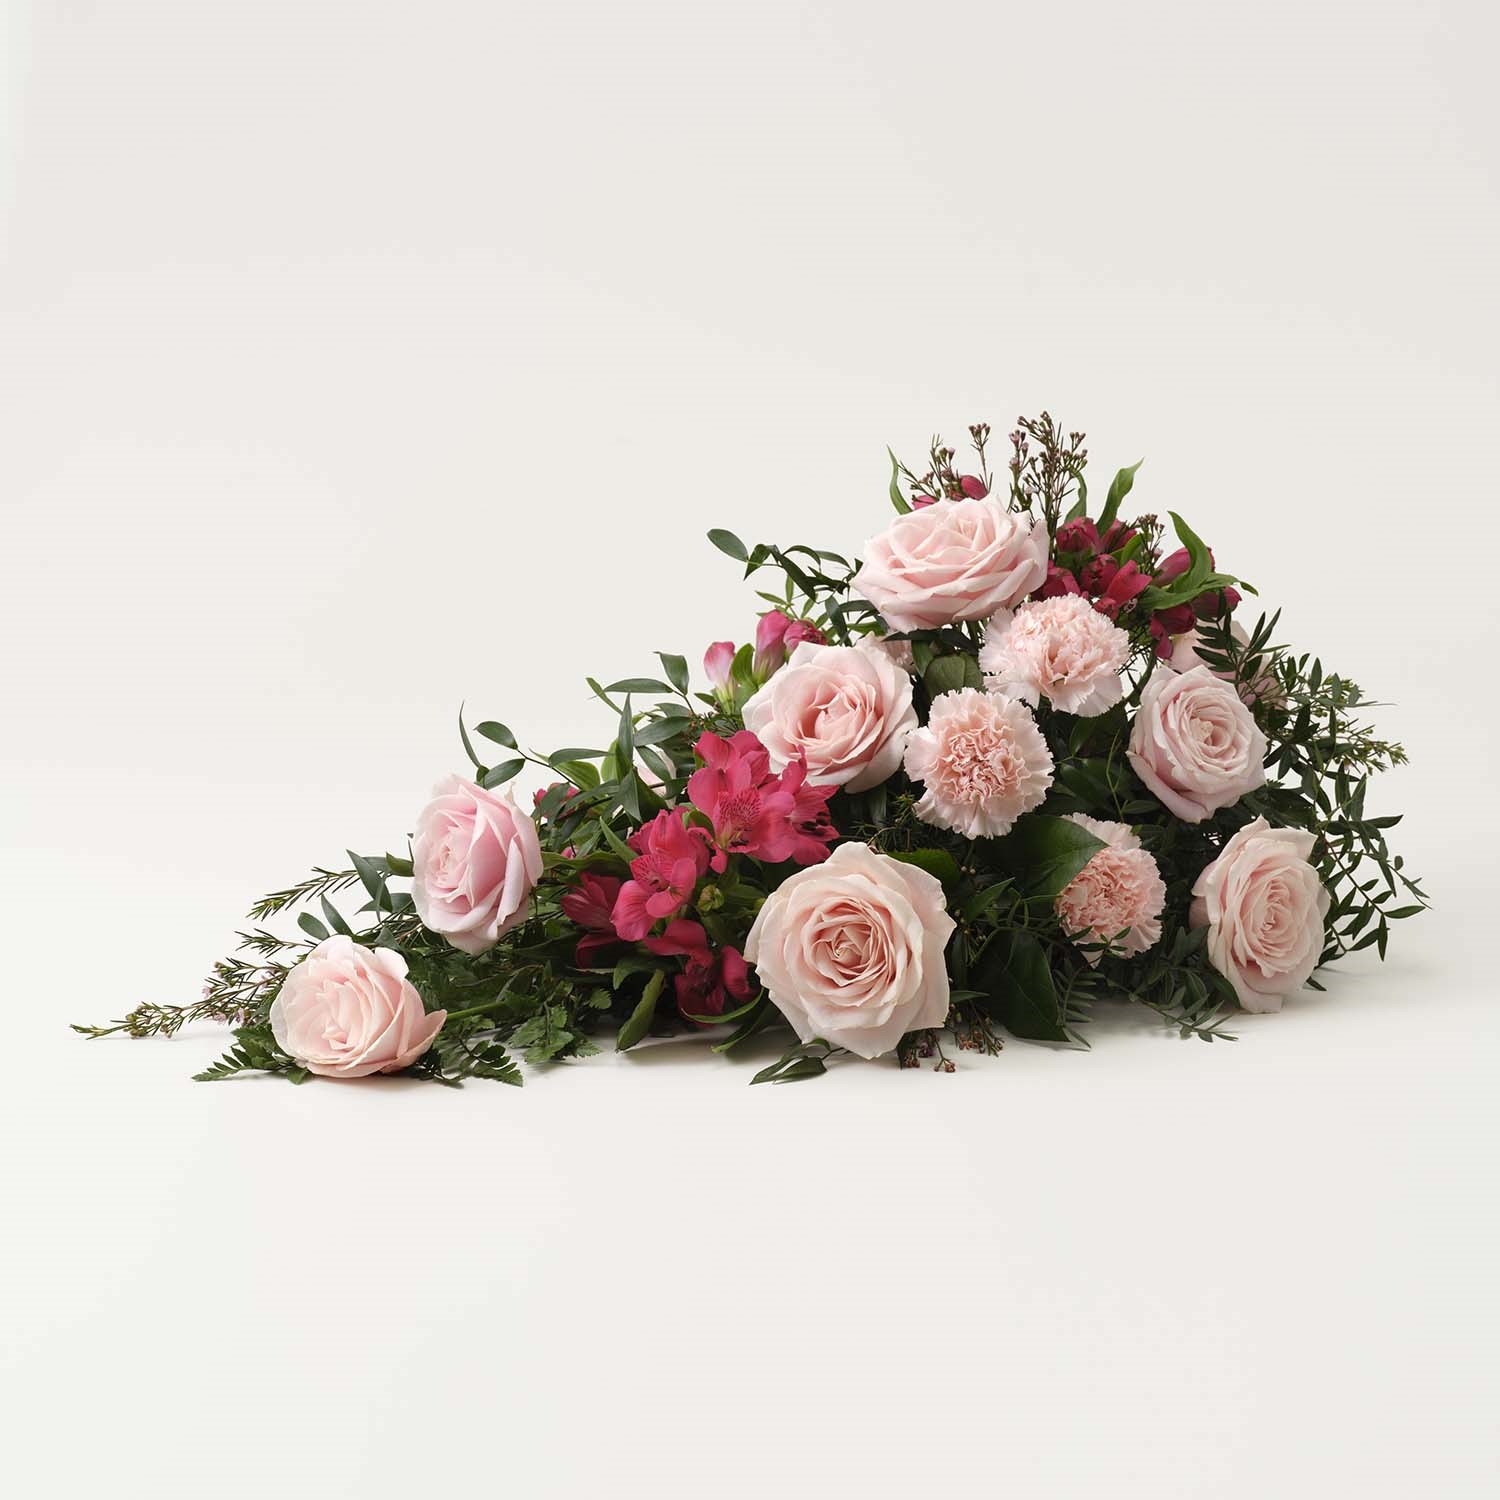 product image for Funeral Spray Arrangement with ribbon